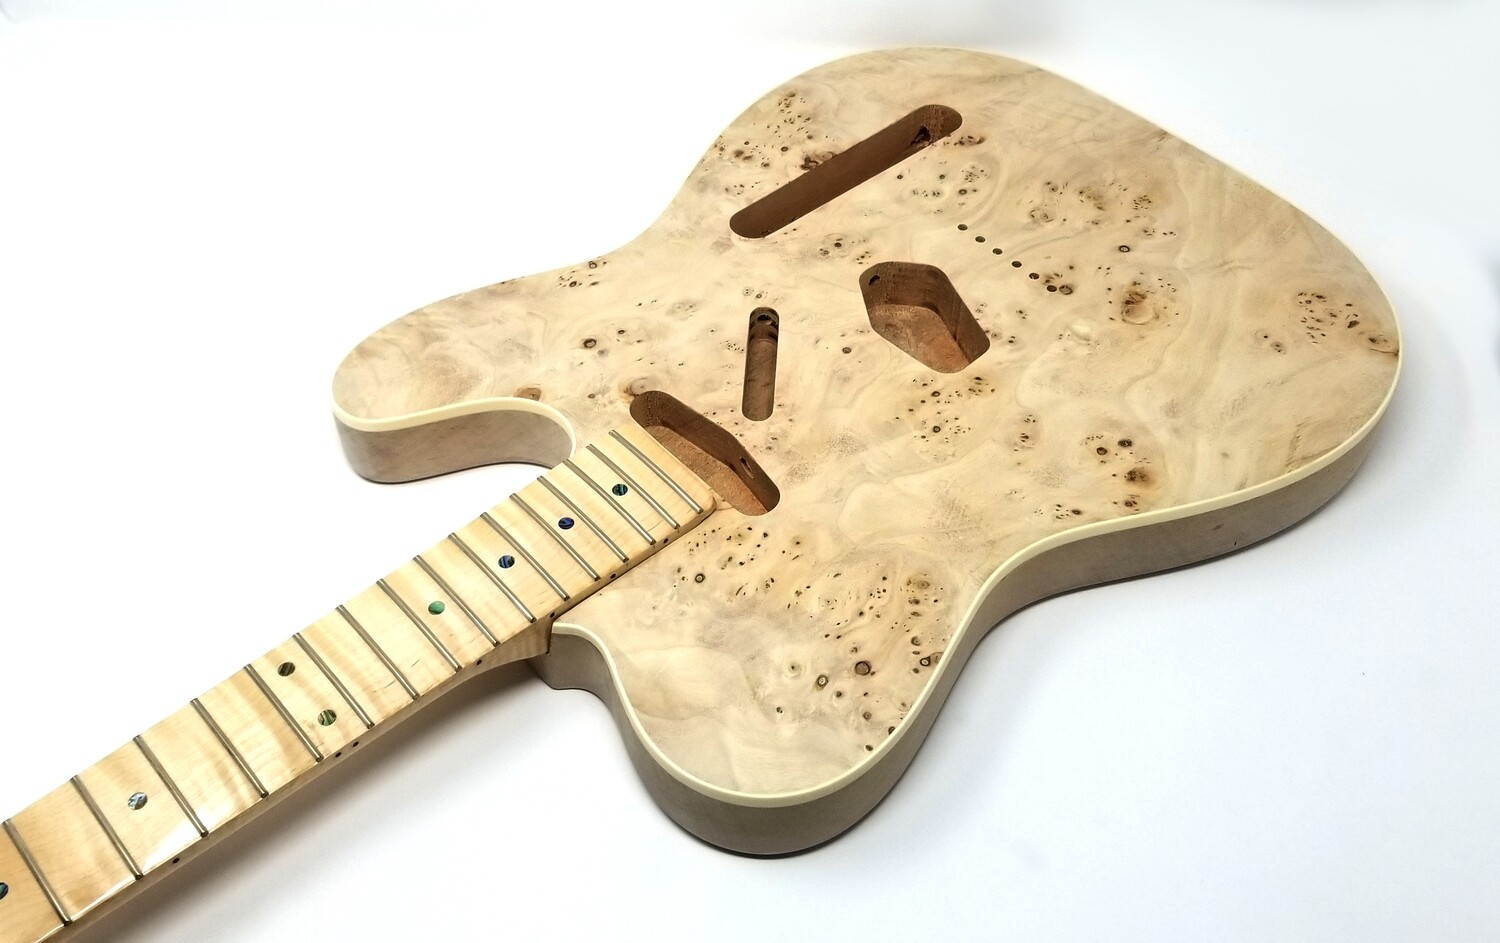 Carparelli Burl Top, 2pc Alder Body, T-Style & Flamed Maple Neck Unfinished Body, Clear Neck